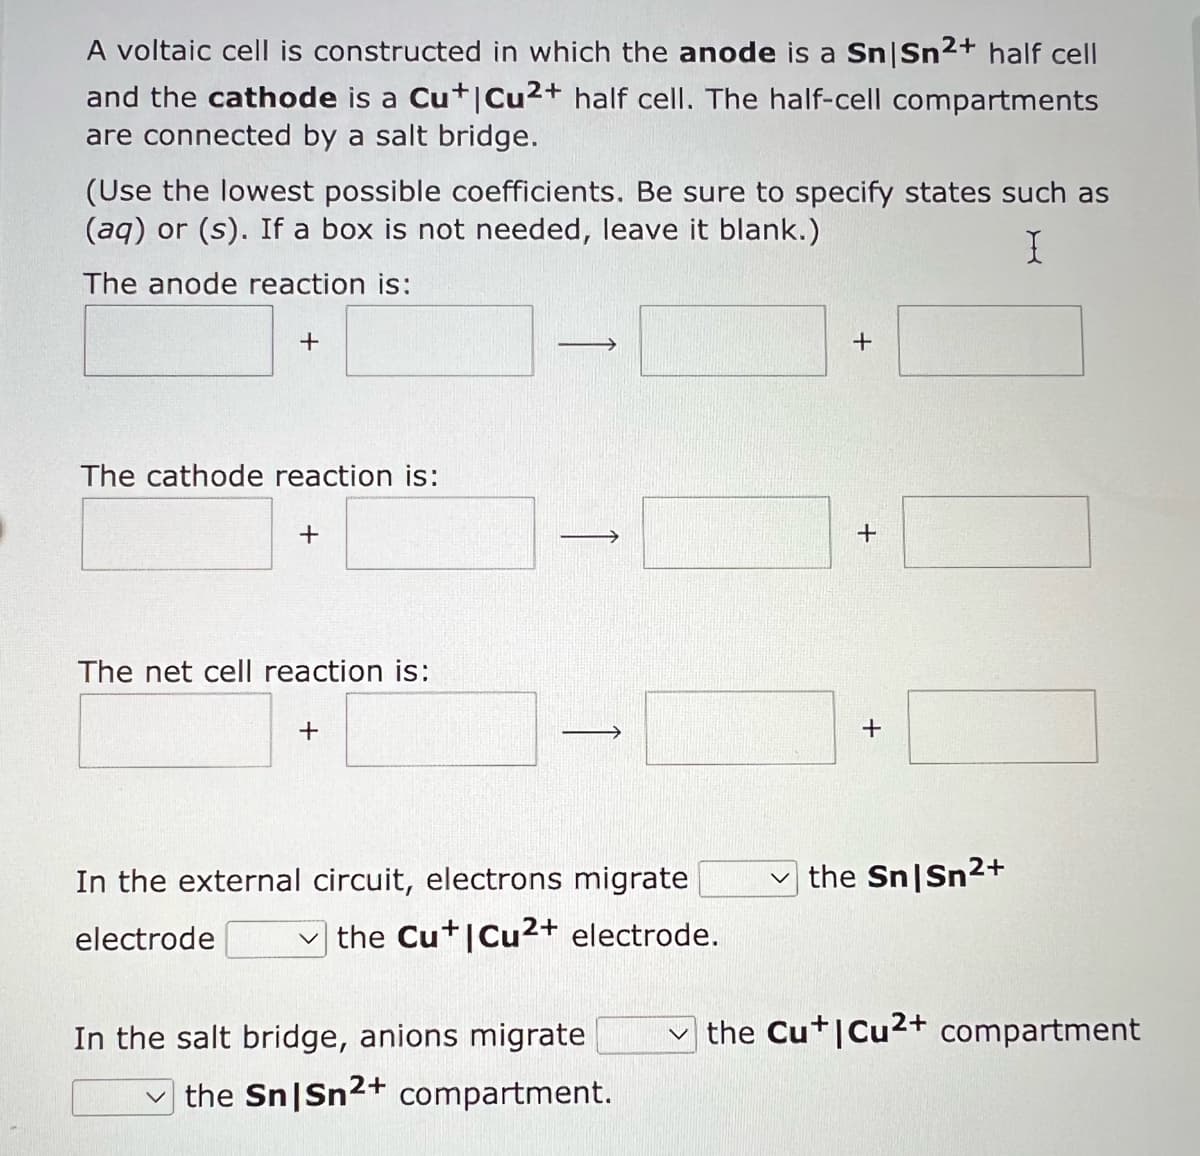 A voltaic cell is constructed in which the anode is a Sn|Sn²+ half cell
and the cathode is a Cu+| Cu²+ half cell. The half-cell compartments
are connected by a salt bridge.
(Use the lowest possible coefficients. Be sure to specify states such as
(aq) or (s). If a box is not needed, leave it blank.)
I
The anode reaction is:
+
The cathode reaction is:
+
The net cell reaction is:
+
In the external circuit, electrons migrate
electrode
the Cu+I Cu²+ electrode.
In the salt bridge, anions migrate
the Sn|Sn²+ compartment.
+
+
+
the Sn|Sn²+
the Cu+I Cu2+ compartment